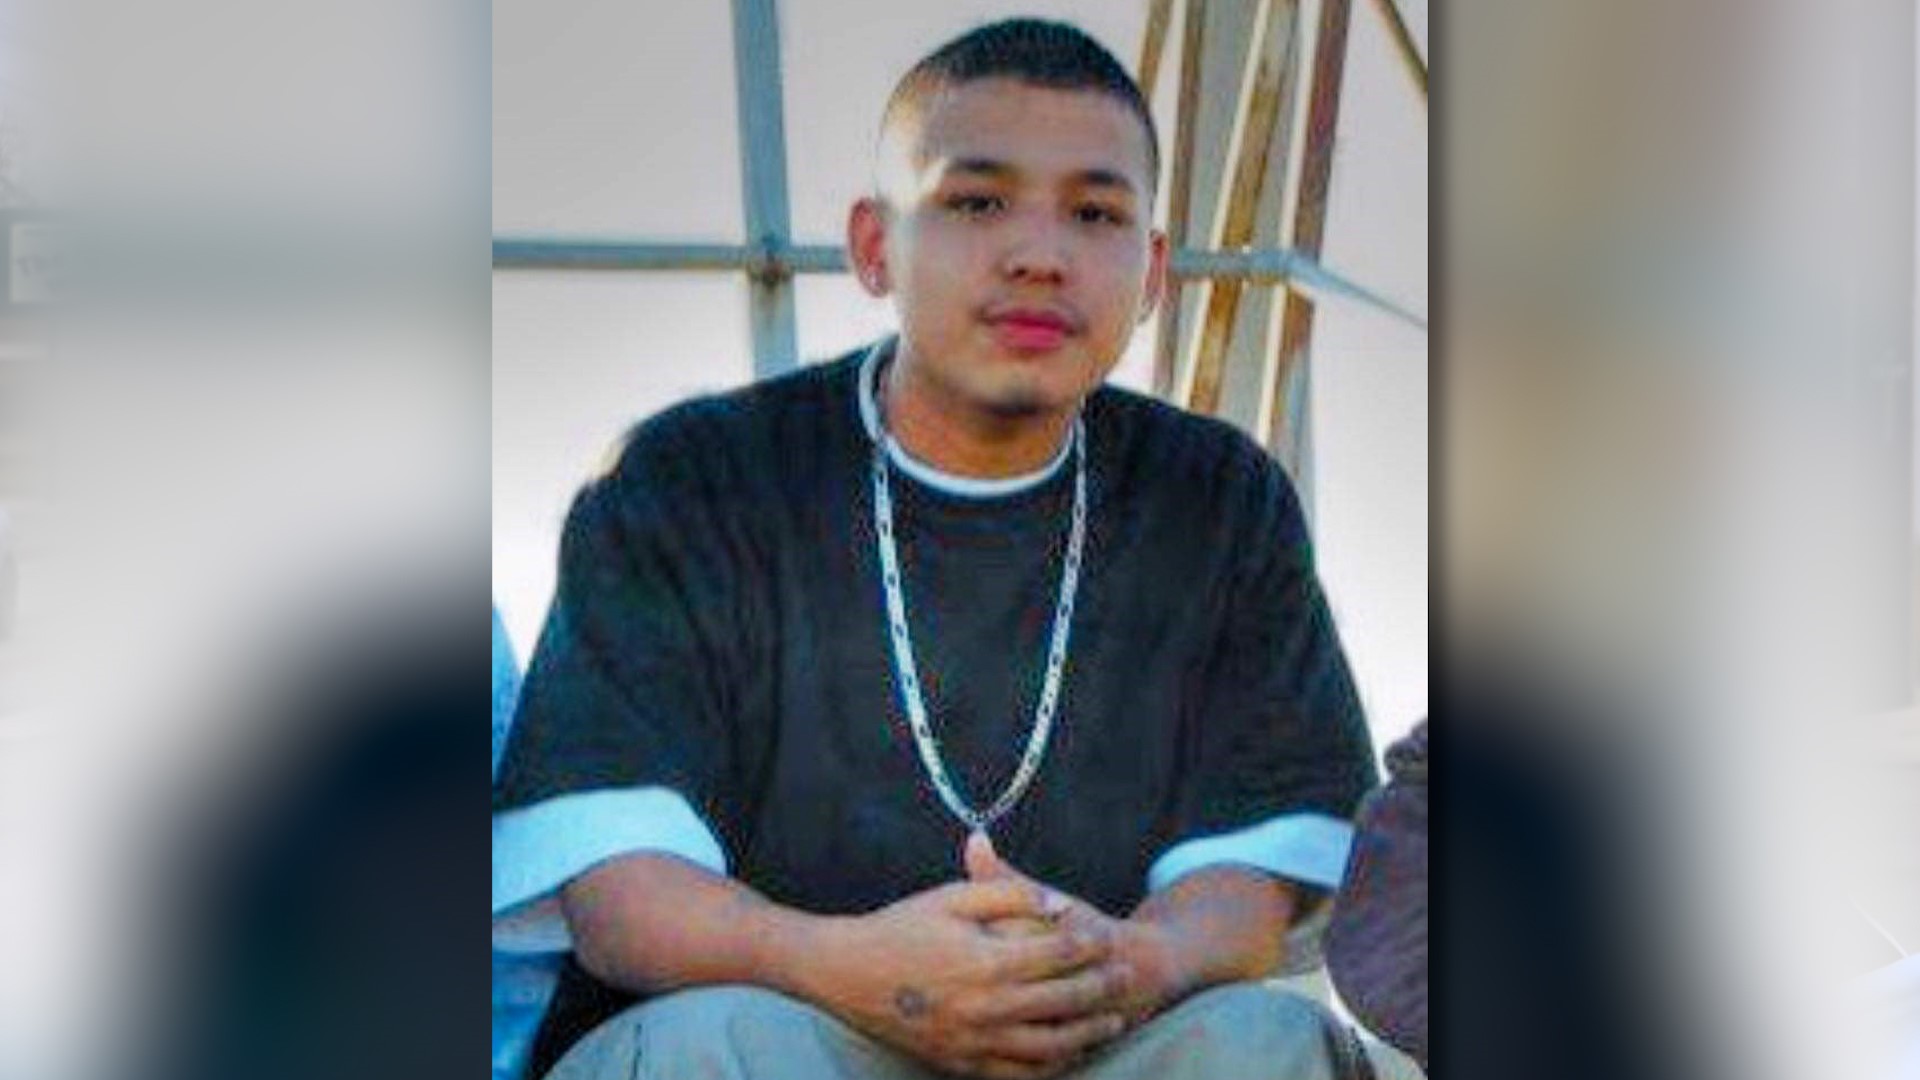 17-year-old Paul Deleon was in a car with his siblings when police say an unknown suspect shot and killed him on December 19, 2009.